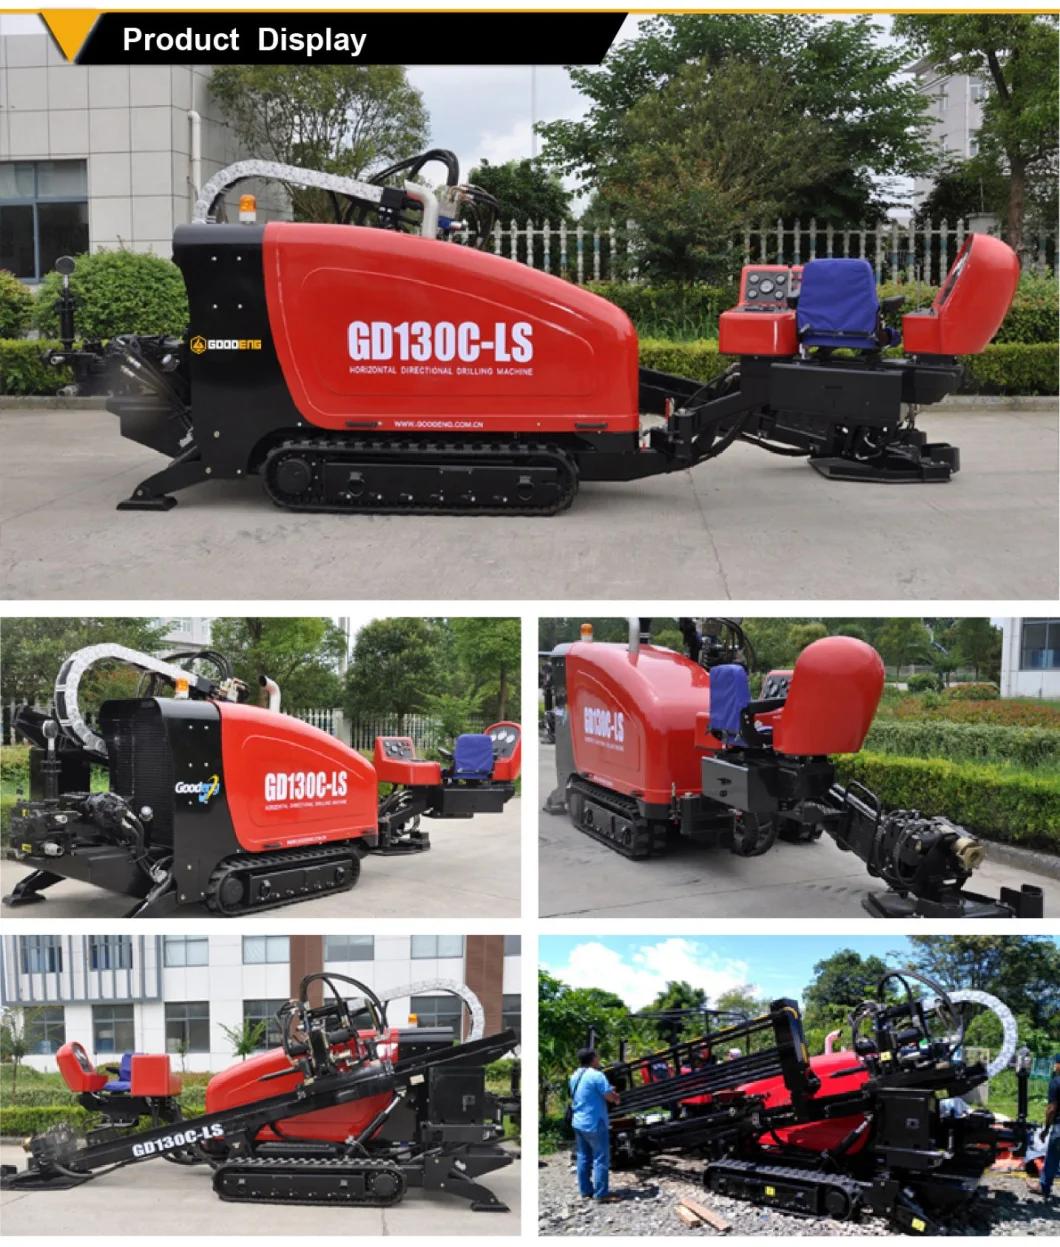 Goodeng GD130C-LS pipeline crossing machine 13ton trenchless machine